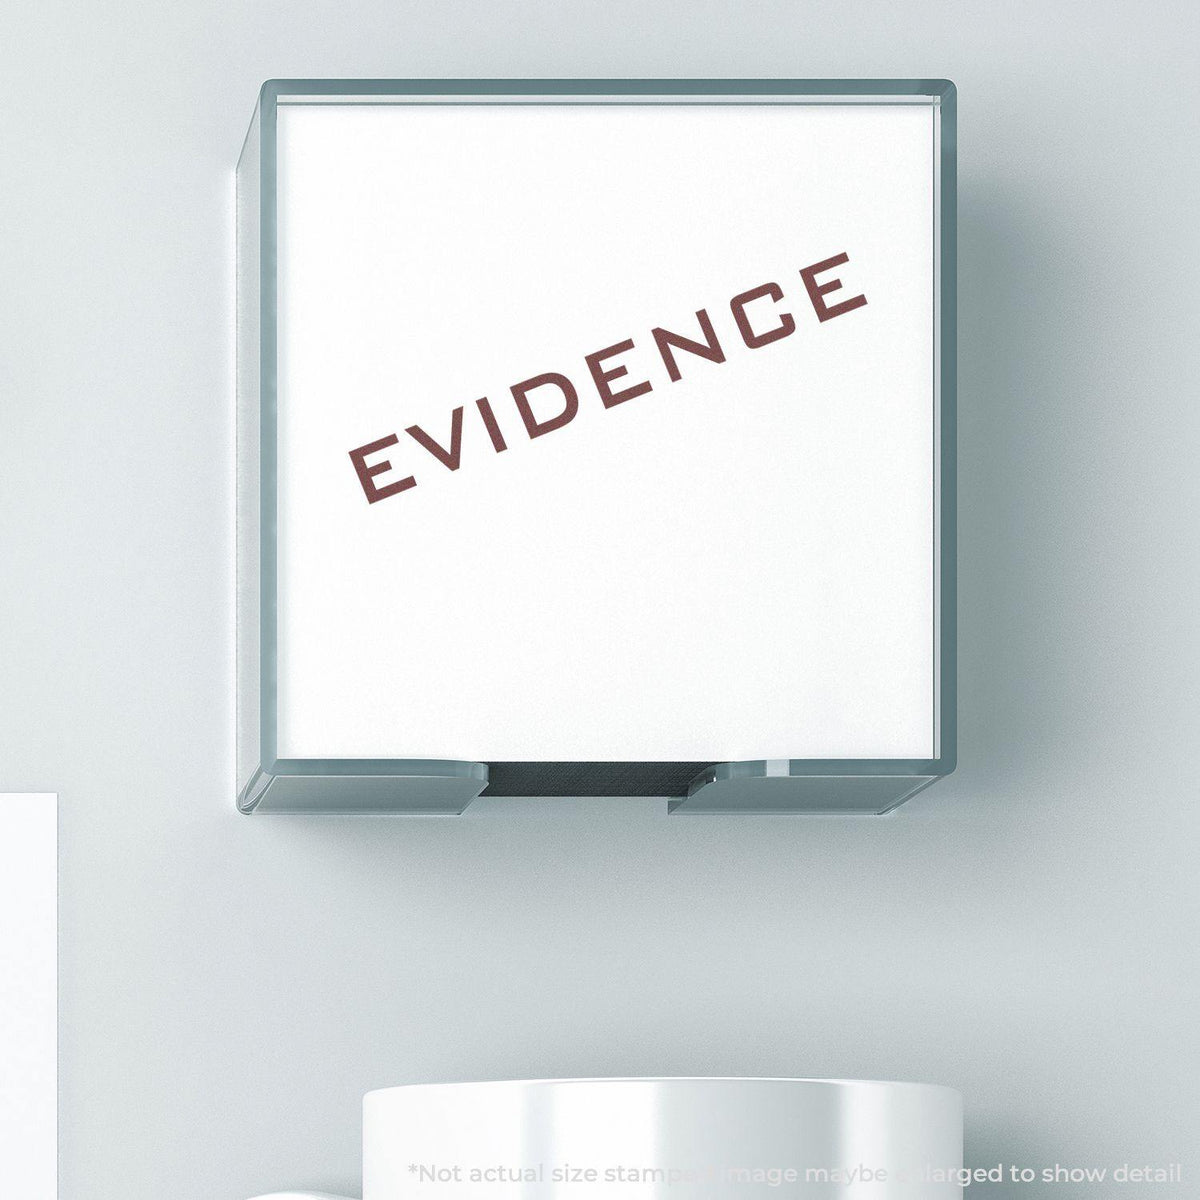 Large Evidence Rubber Stamp In Use Photo